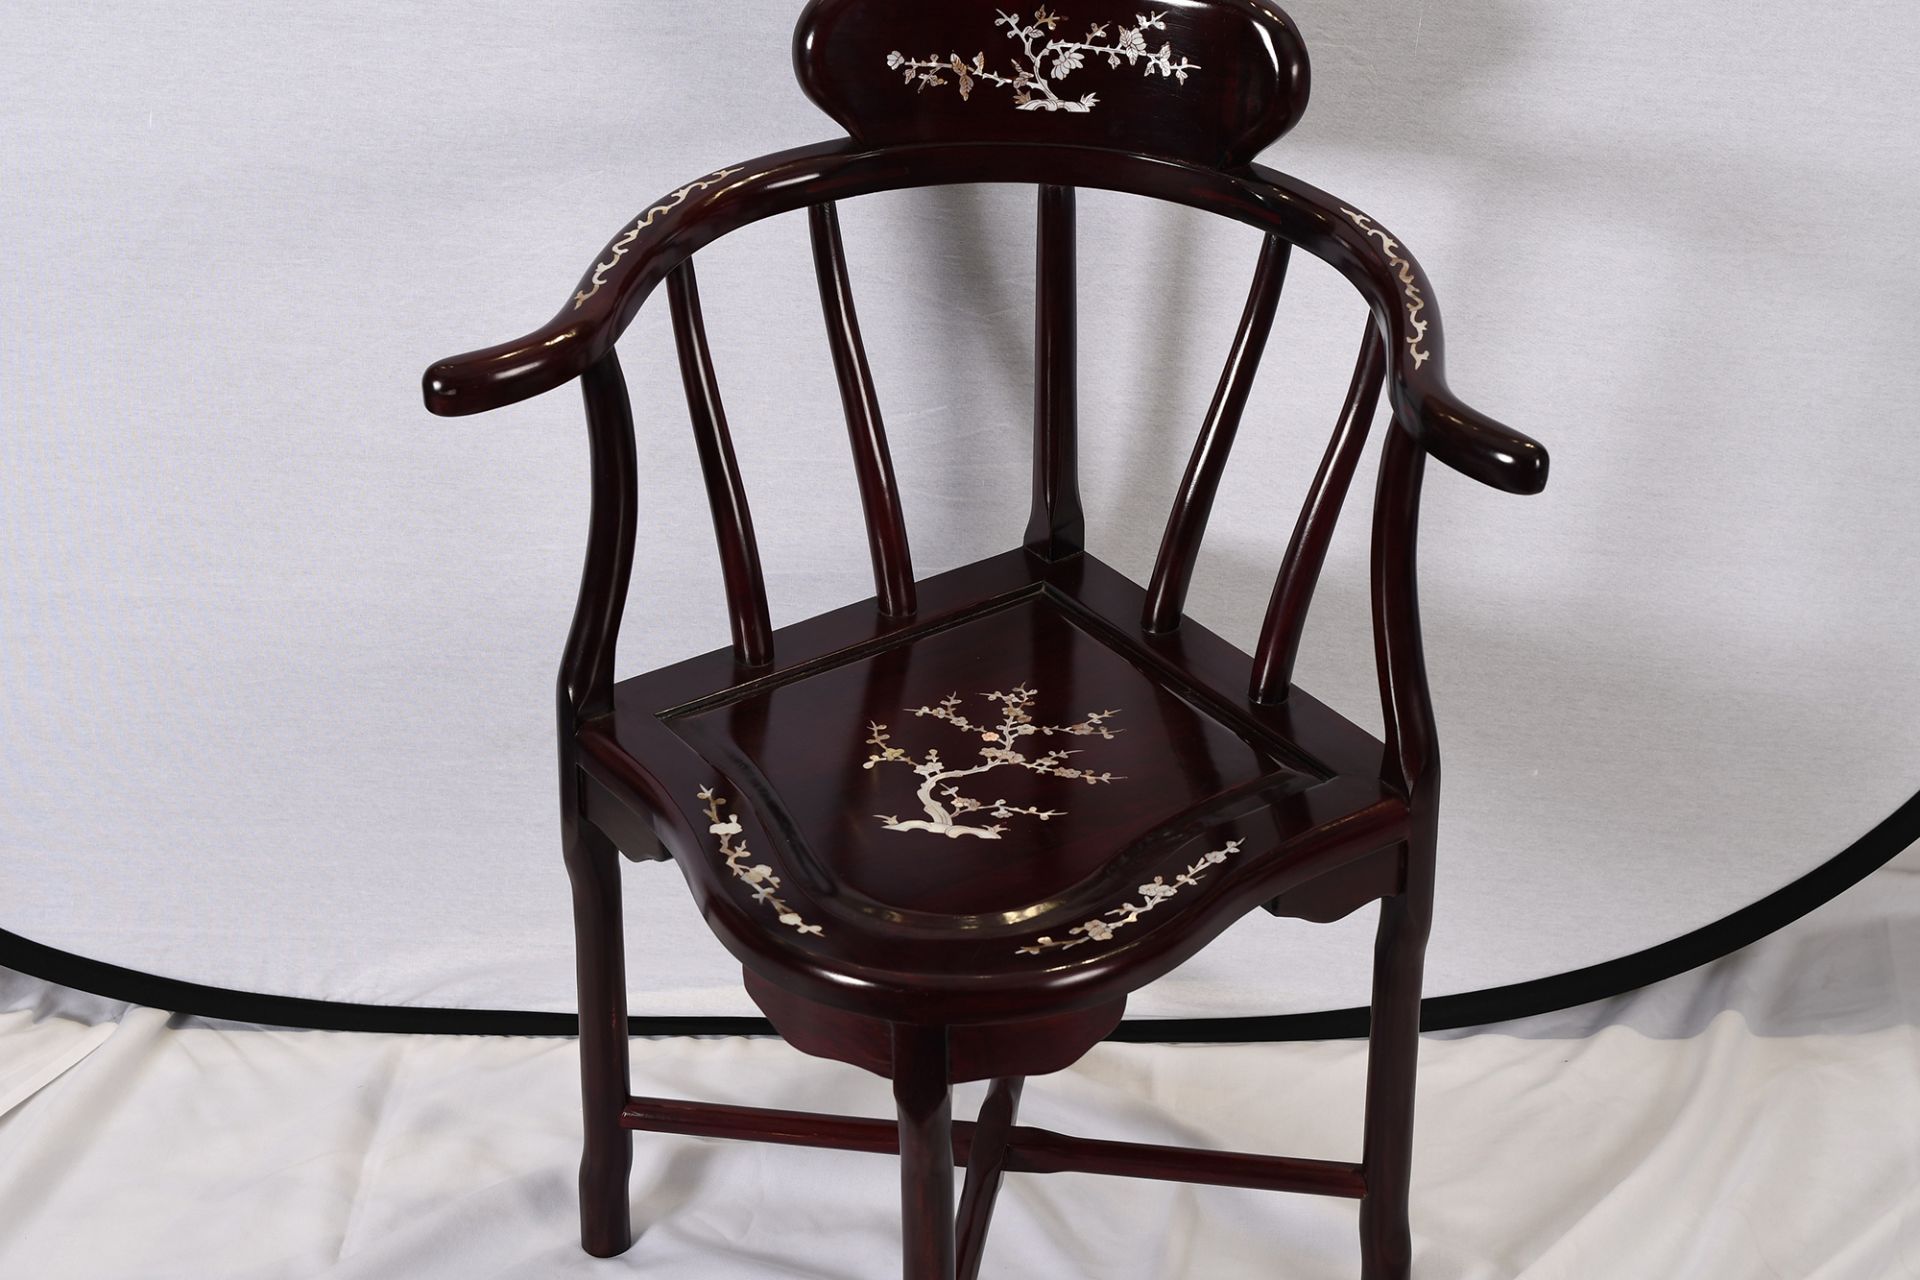 Mother Of Pearl Inlaid Chair - Image 5 of 6